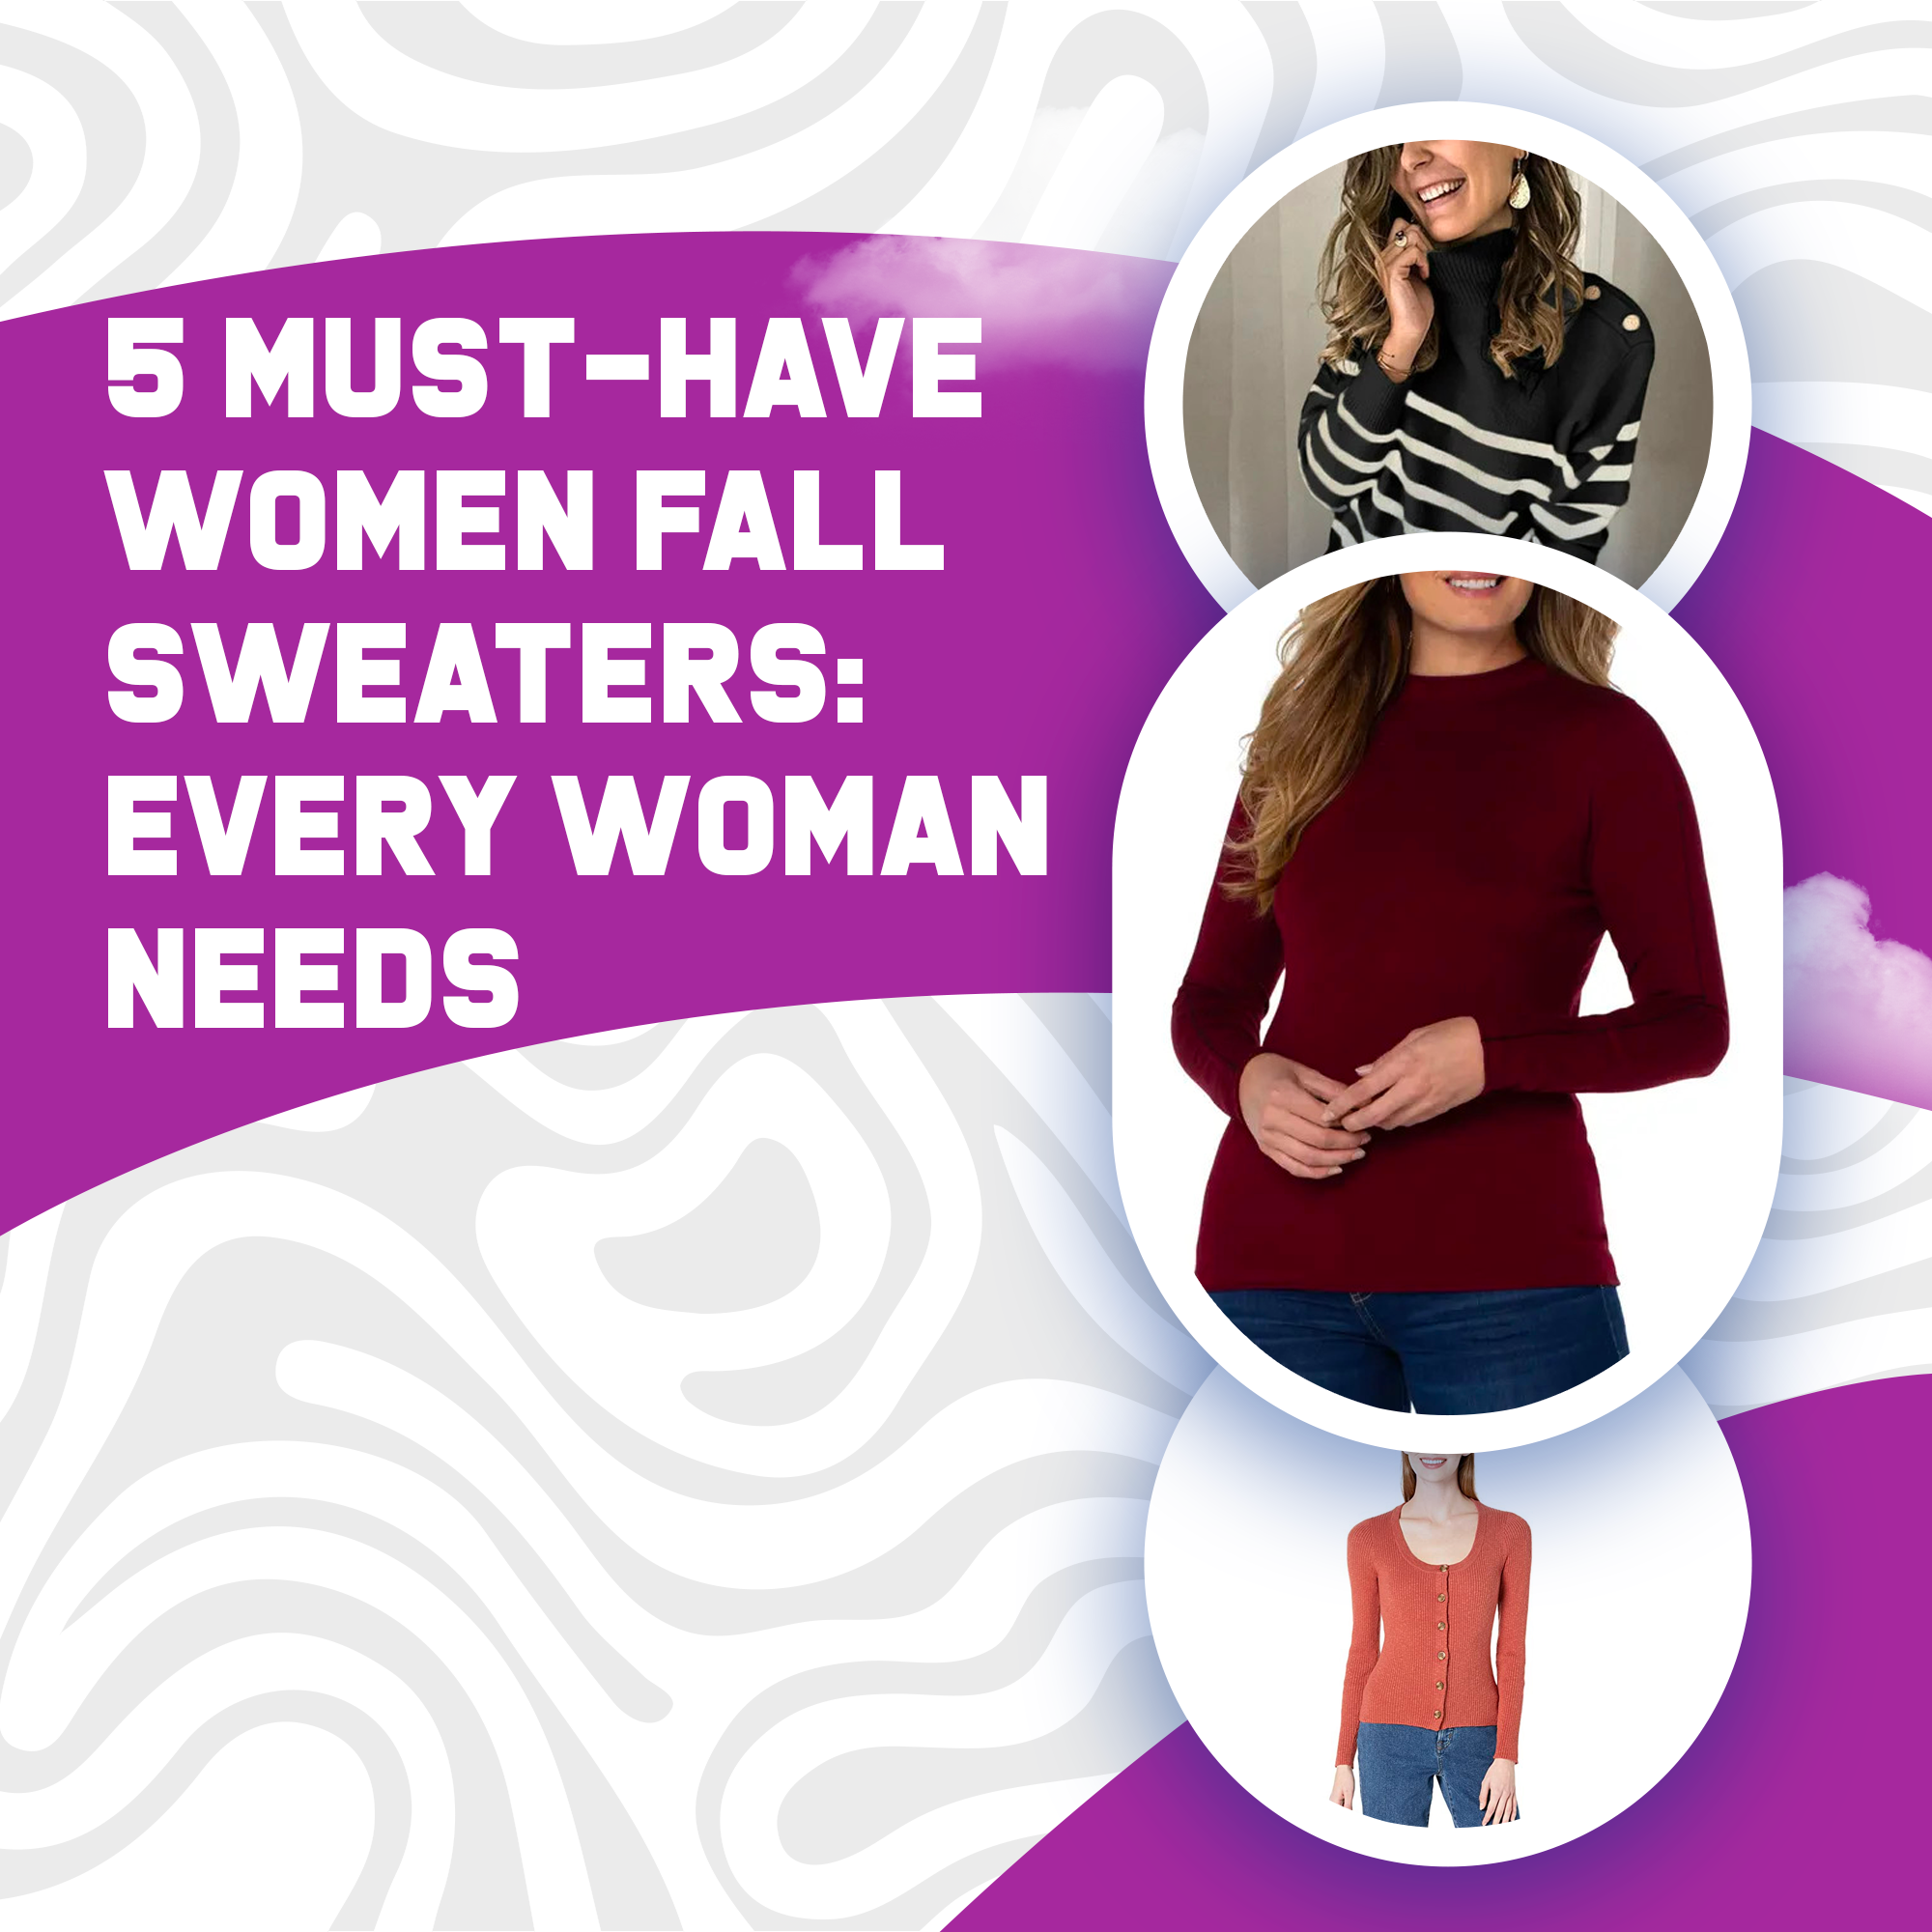 5 Must-Have Women Fall Sweaters: Every Woman Needs